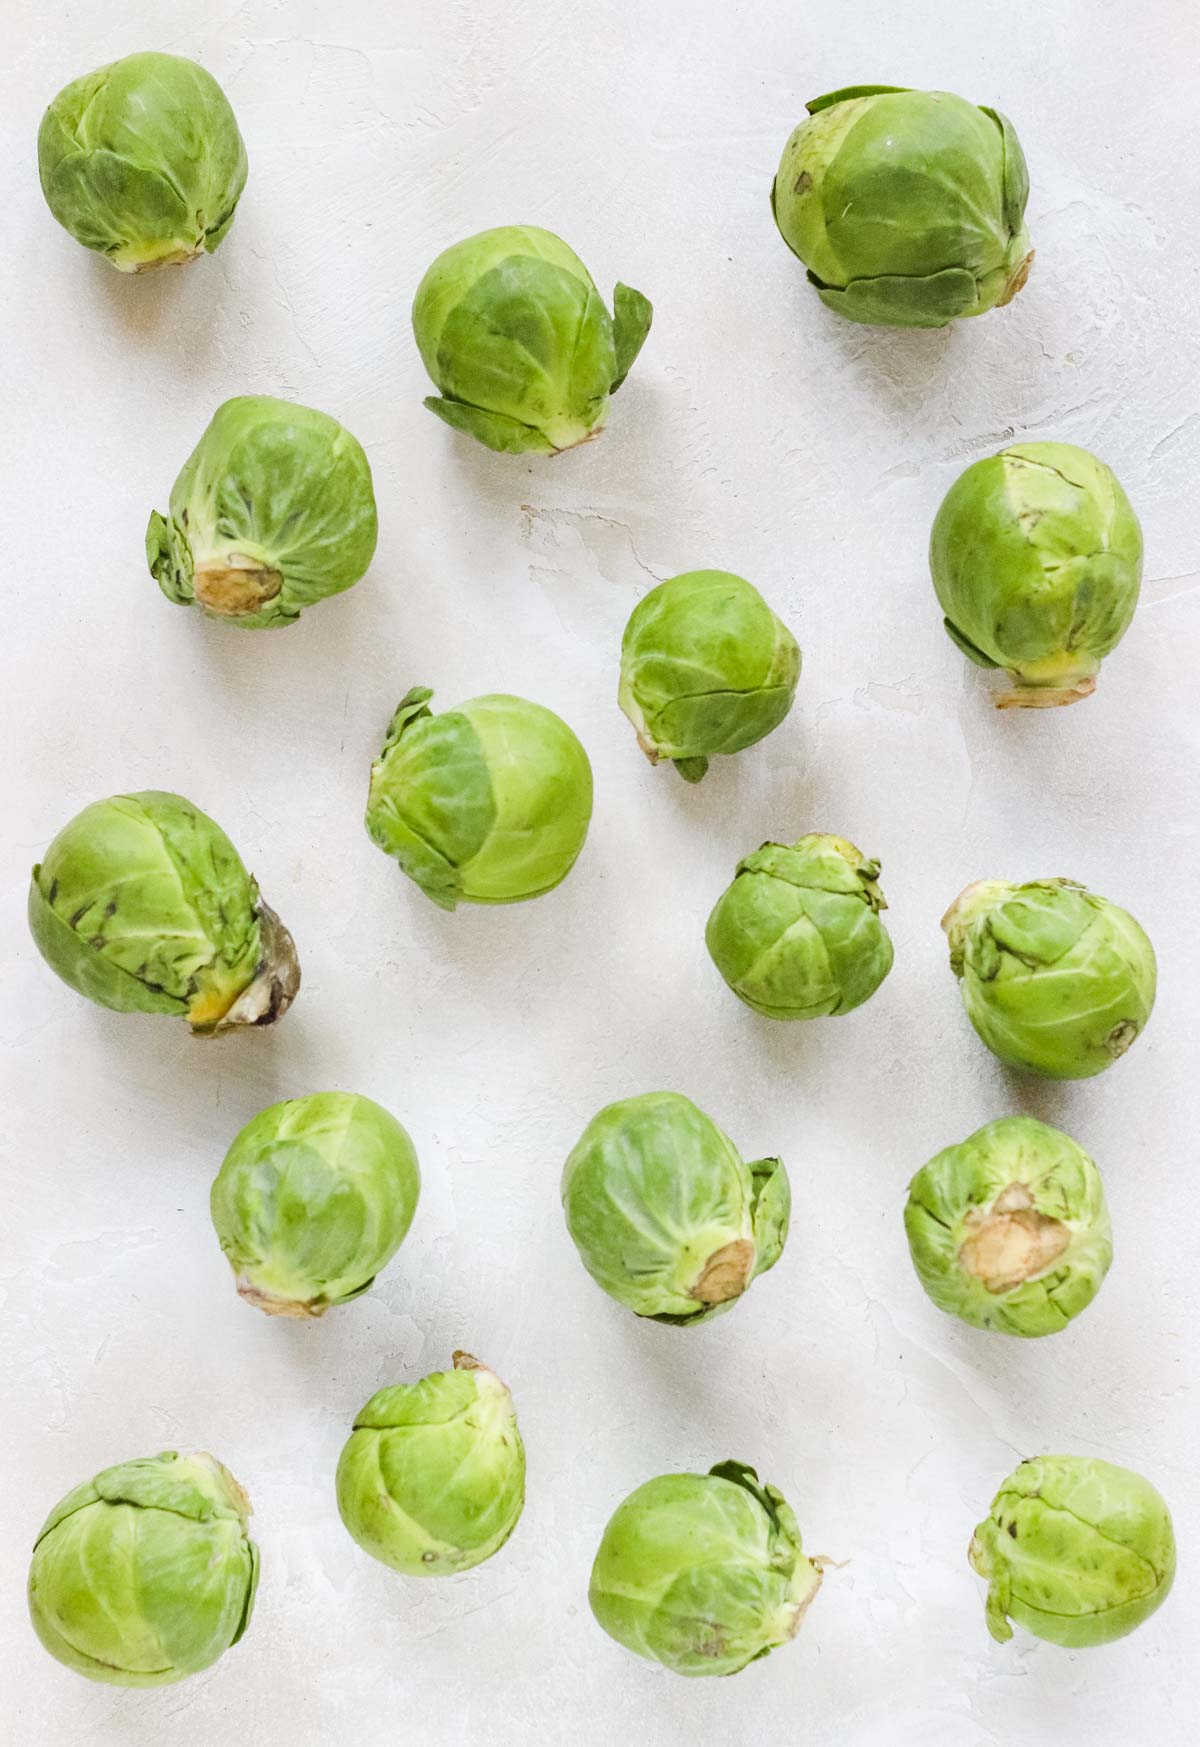 Brussels sprouts scattered on a white countertop